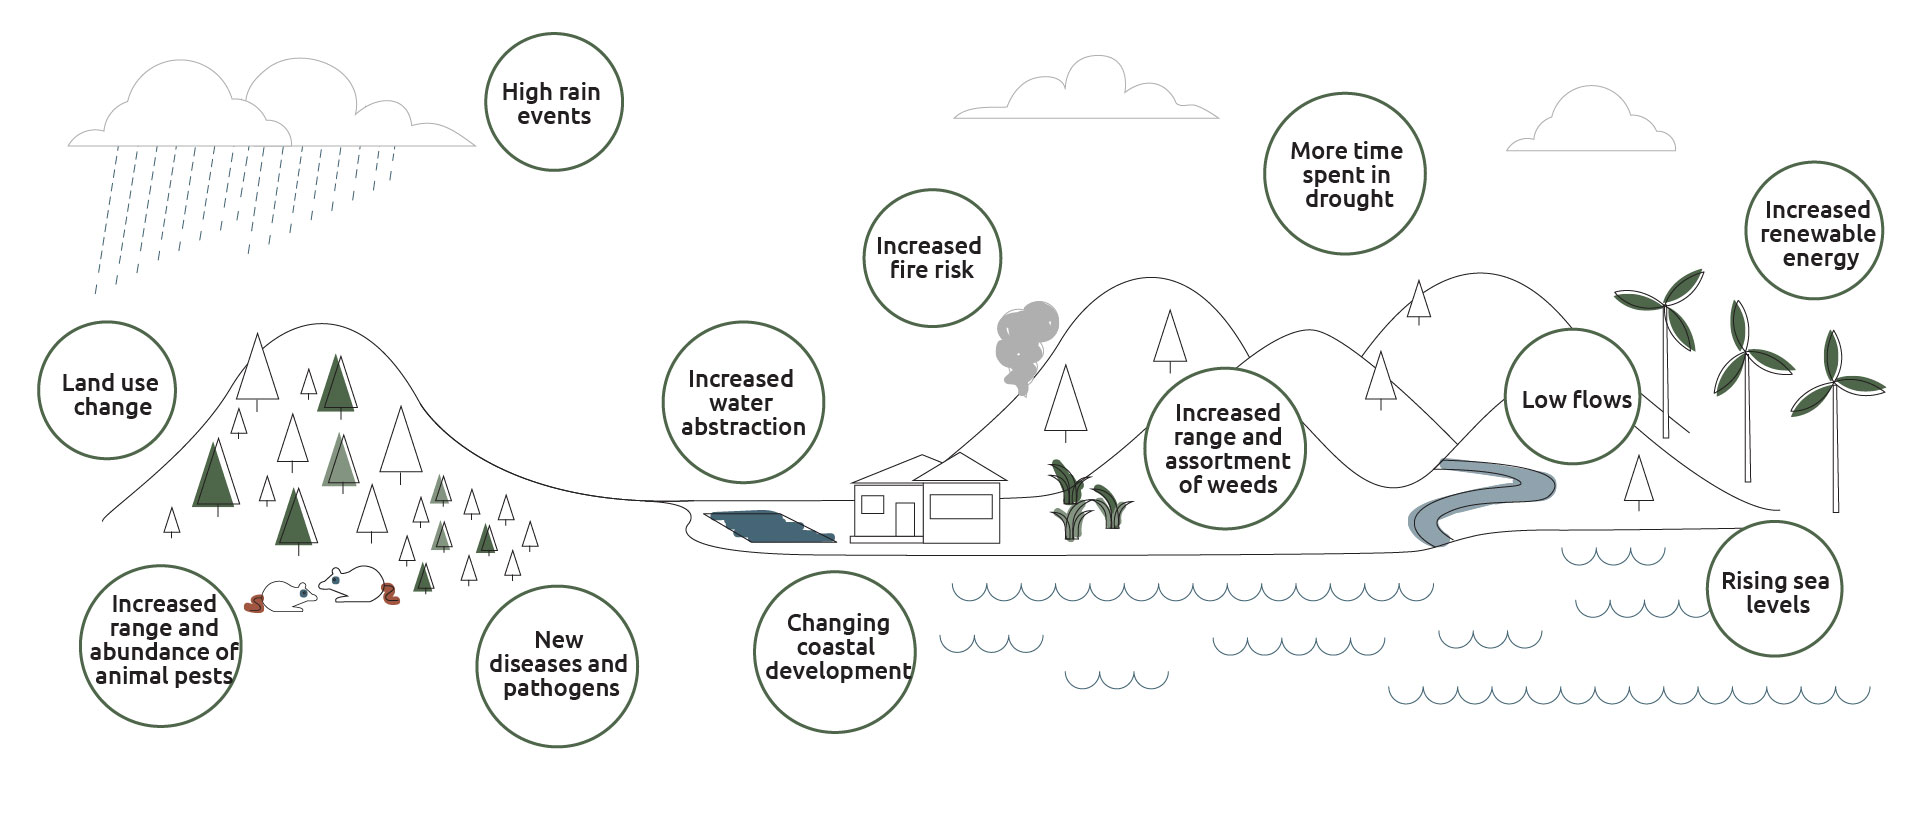 Infographic of the impacts of climate change on a landscape, the issues are in bubbles over the landscape. The issues from left to right include land use change, increased range and abundance of animal pests.